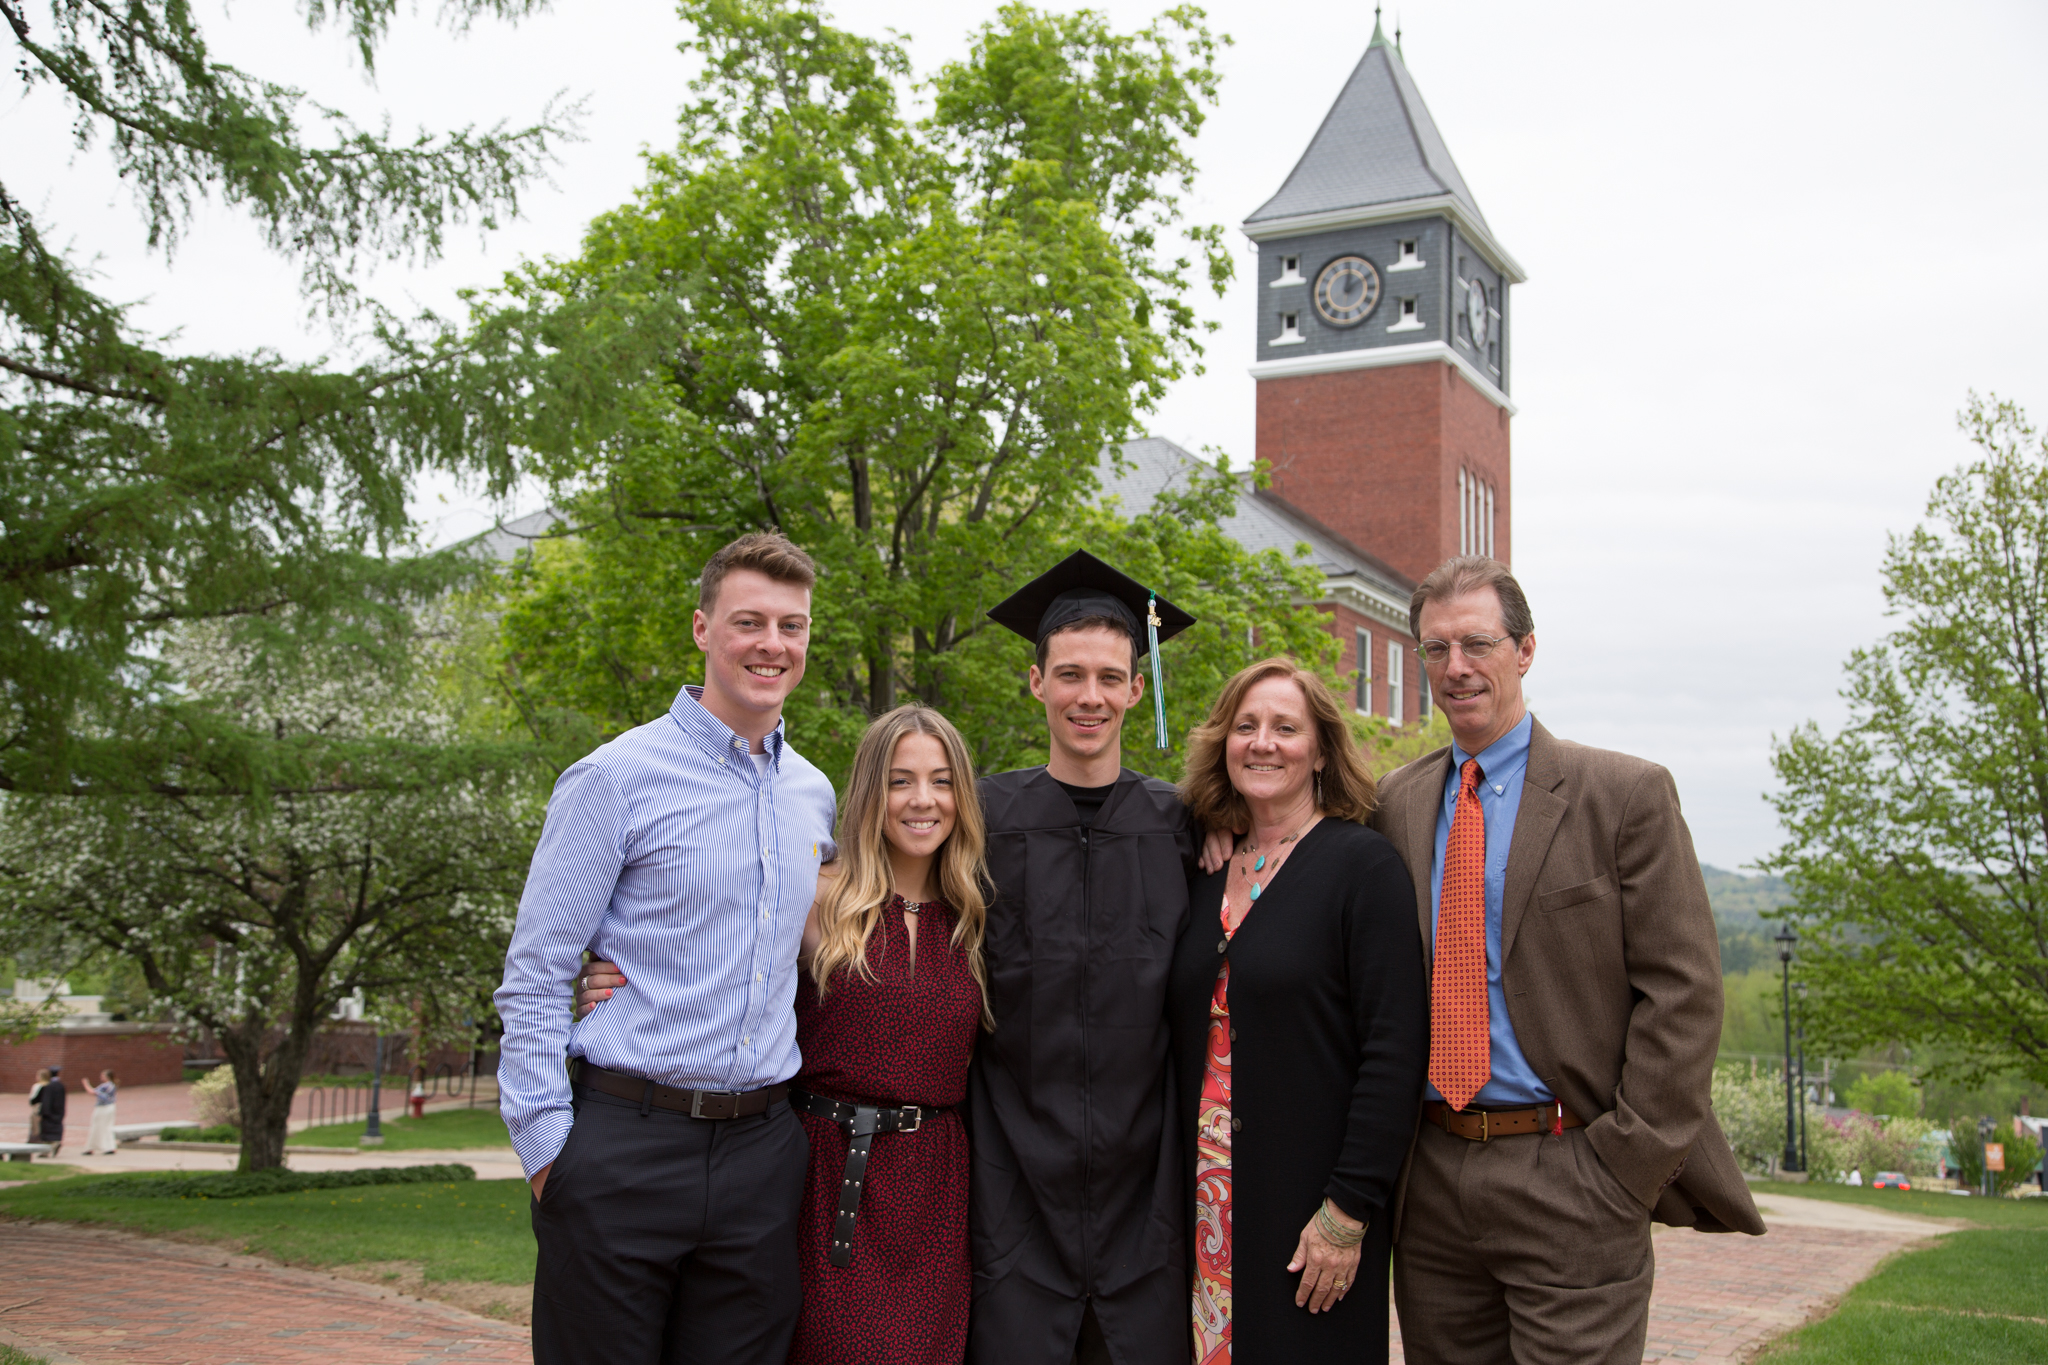 A jubilant graduate and his family pose in front of iconic Rounds Tower. Kaleb Hart ’11 photo.